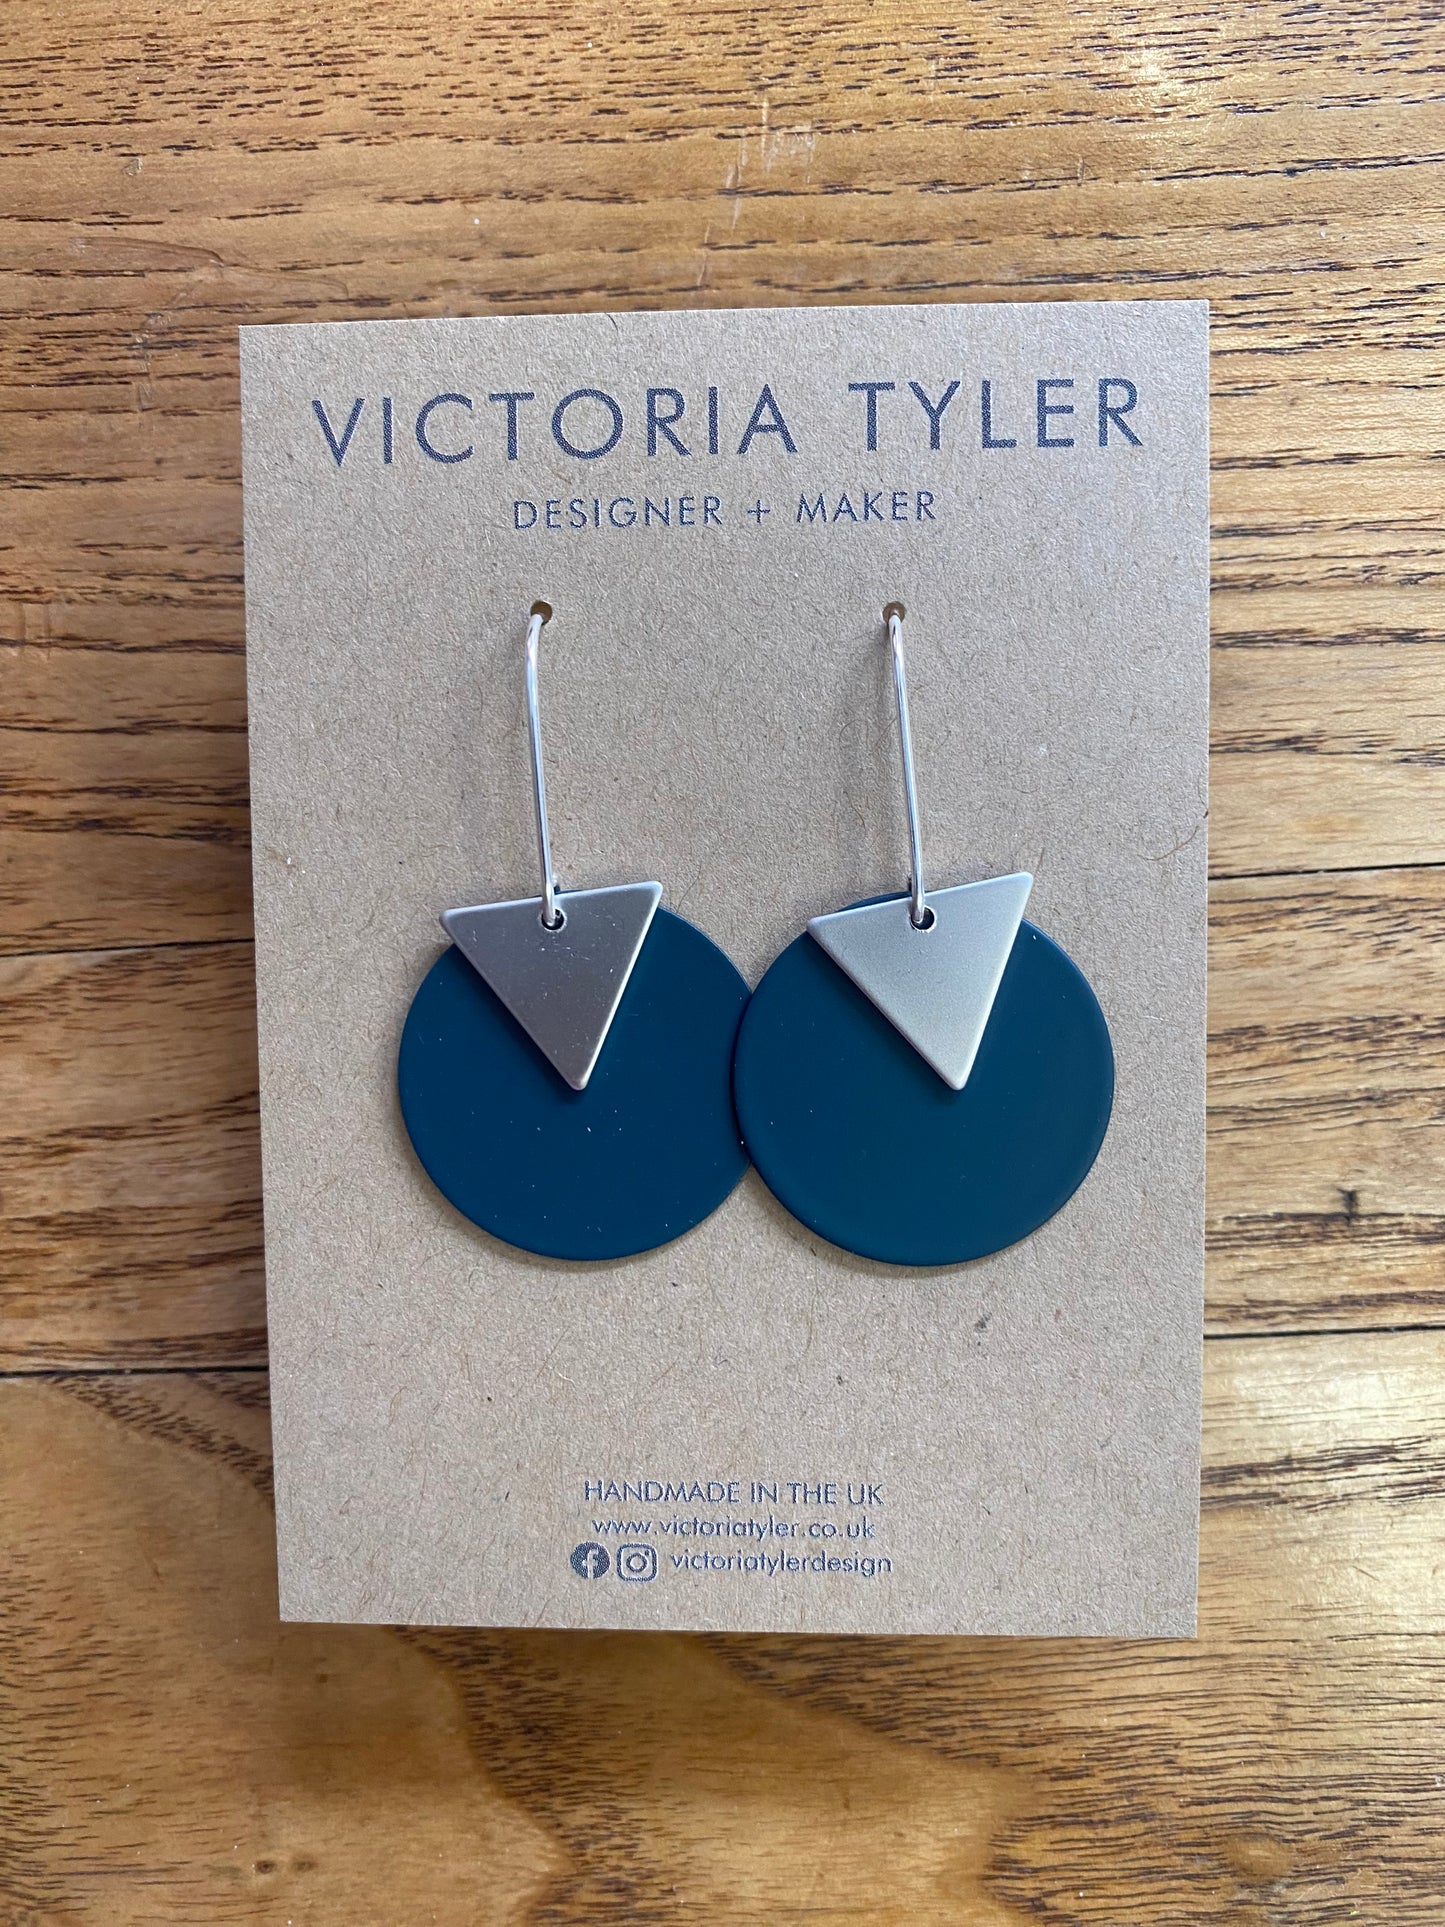 Slate Grey Circle Dangly Earrings with Silver Plate Triangles - 'Kiki'. On a black backing card which says 'Victoria Tyler, Designer + Maker